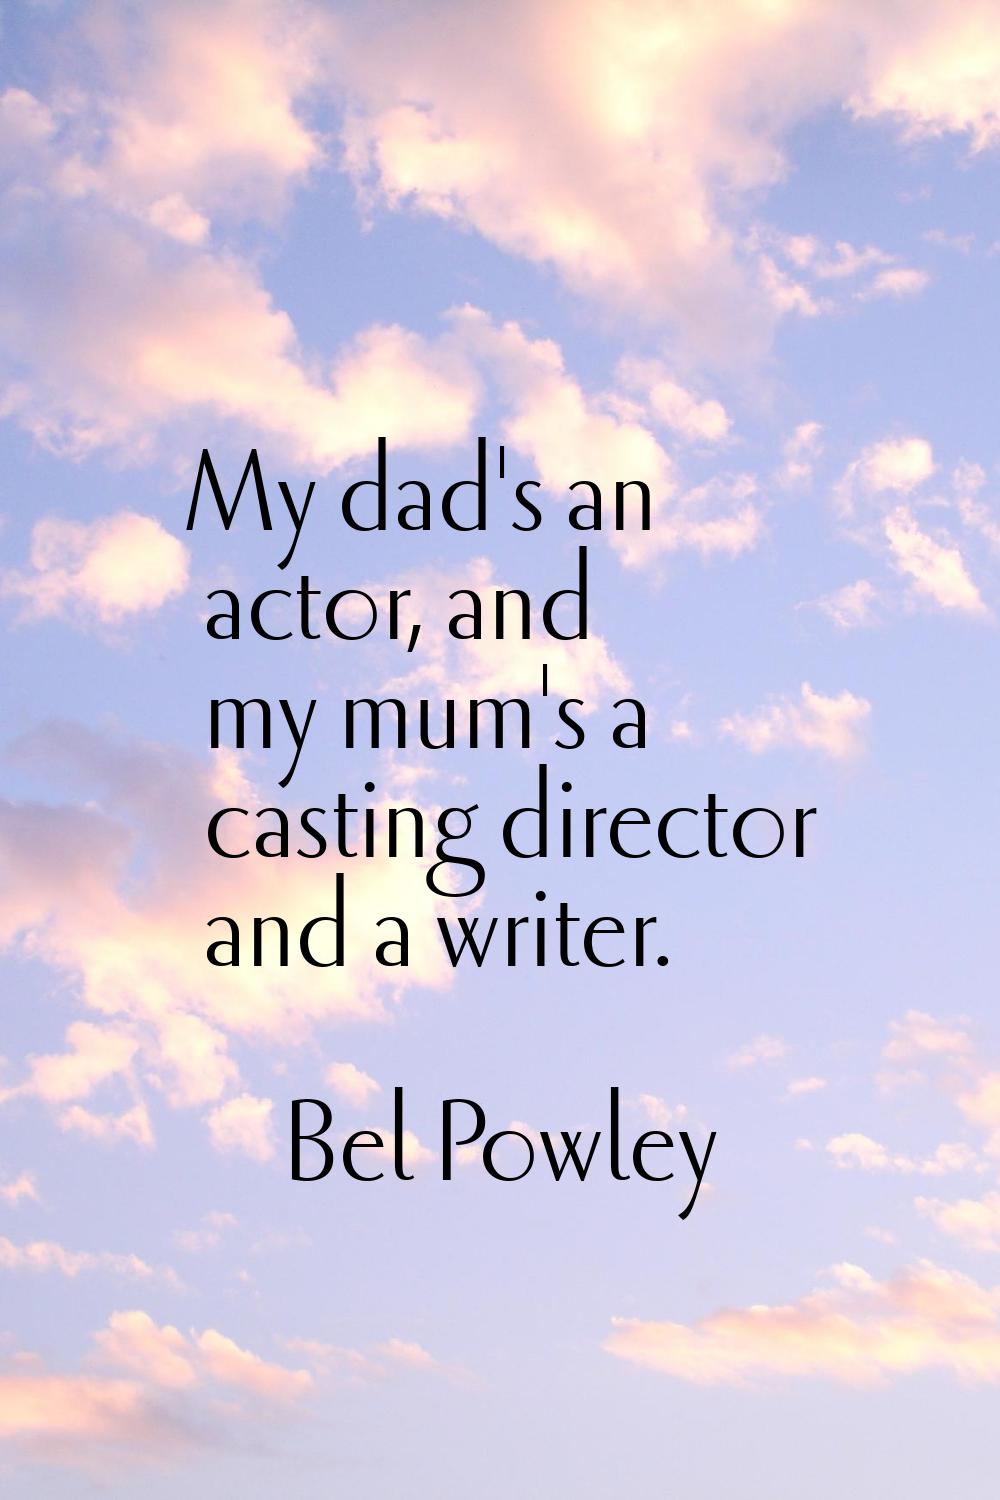 My dad's an actor, and my mum's a casting director and a writer.